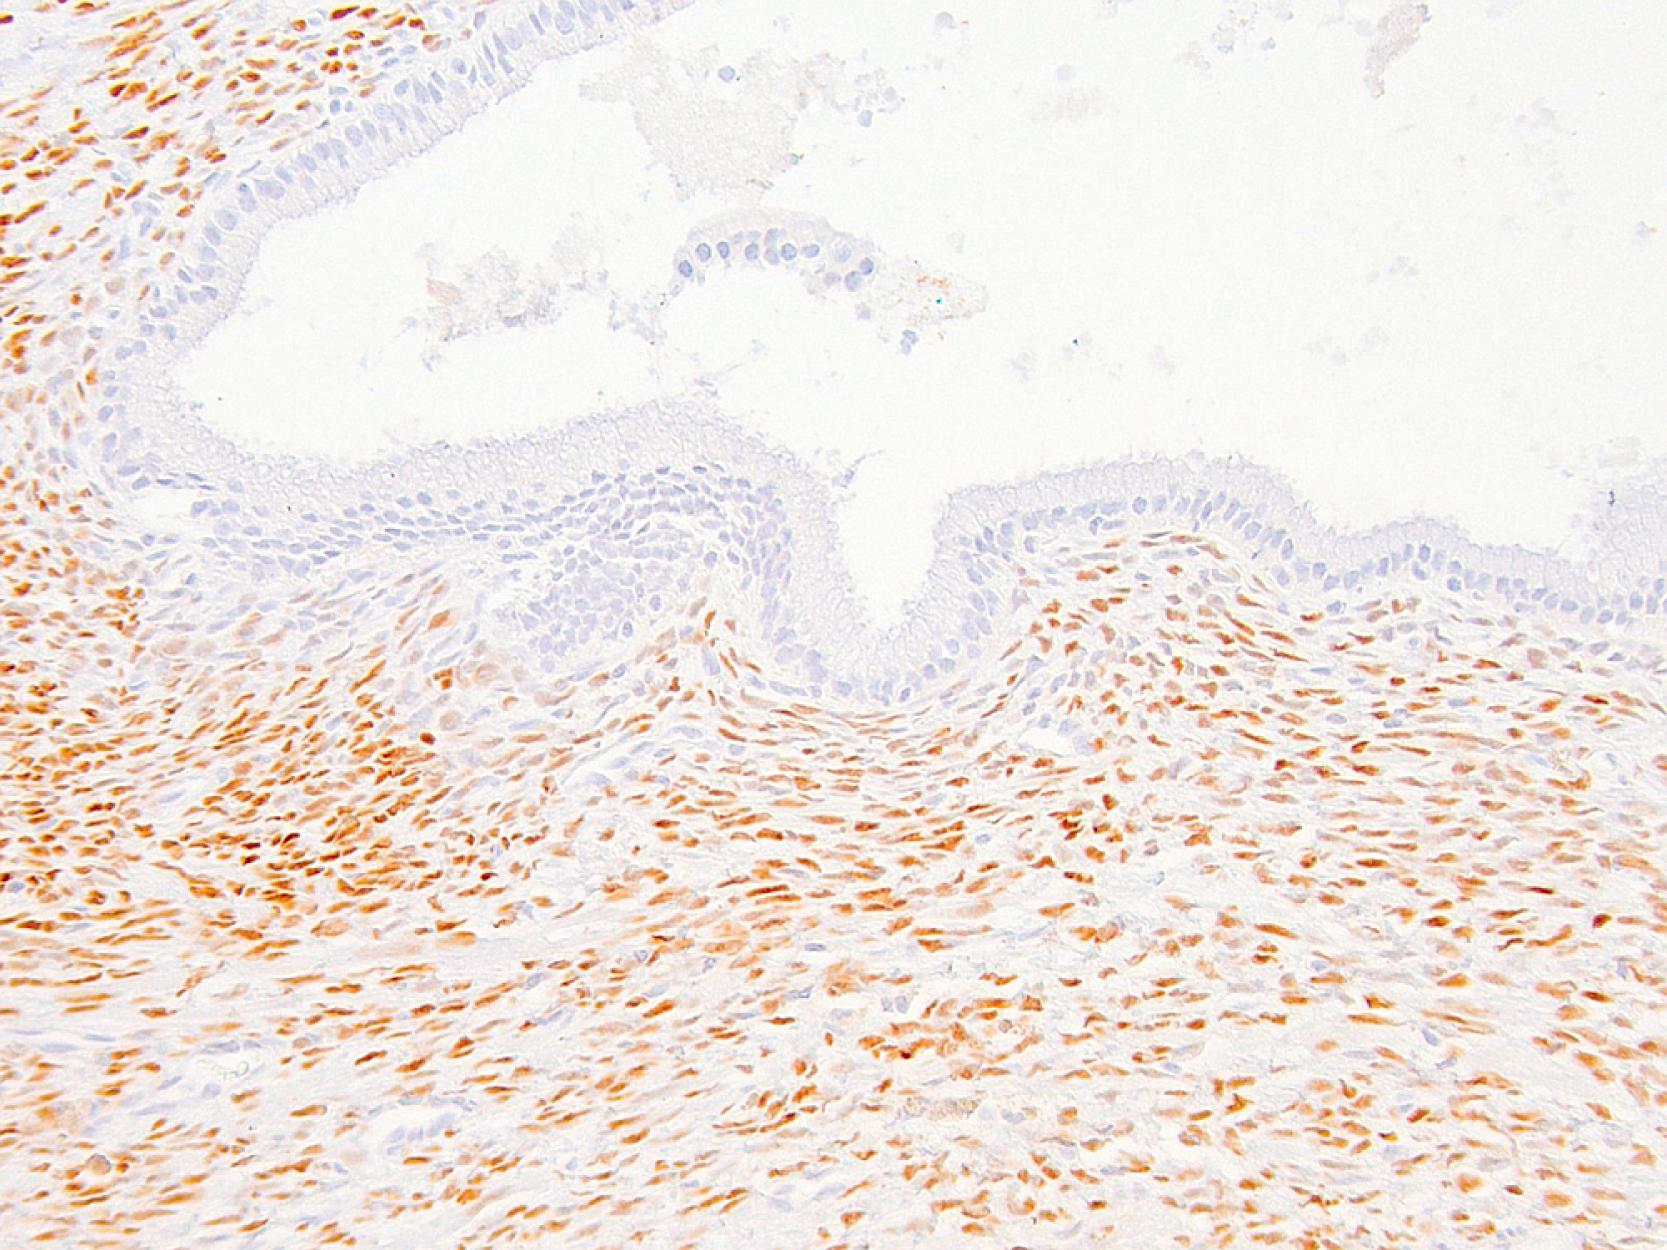 Fig. 15.16, Progesterone receptors are expressed in the ovarian-type stroma cells and may be used to confirm the diagnosis in equivocal cases of mucinous cystic neoplasms.